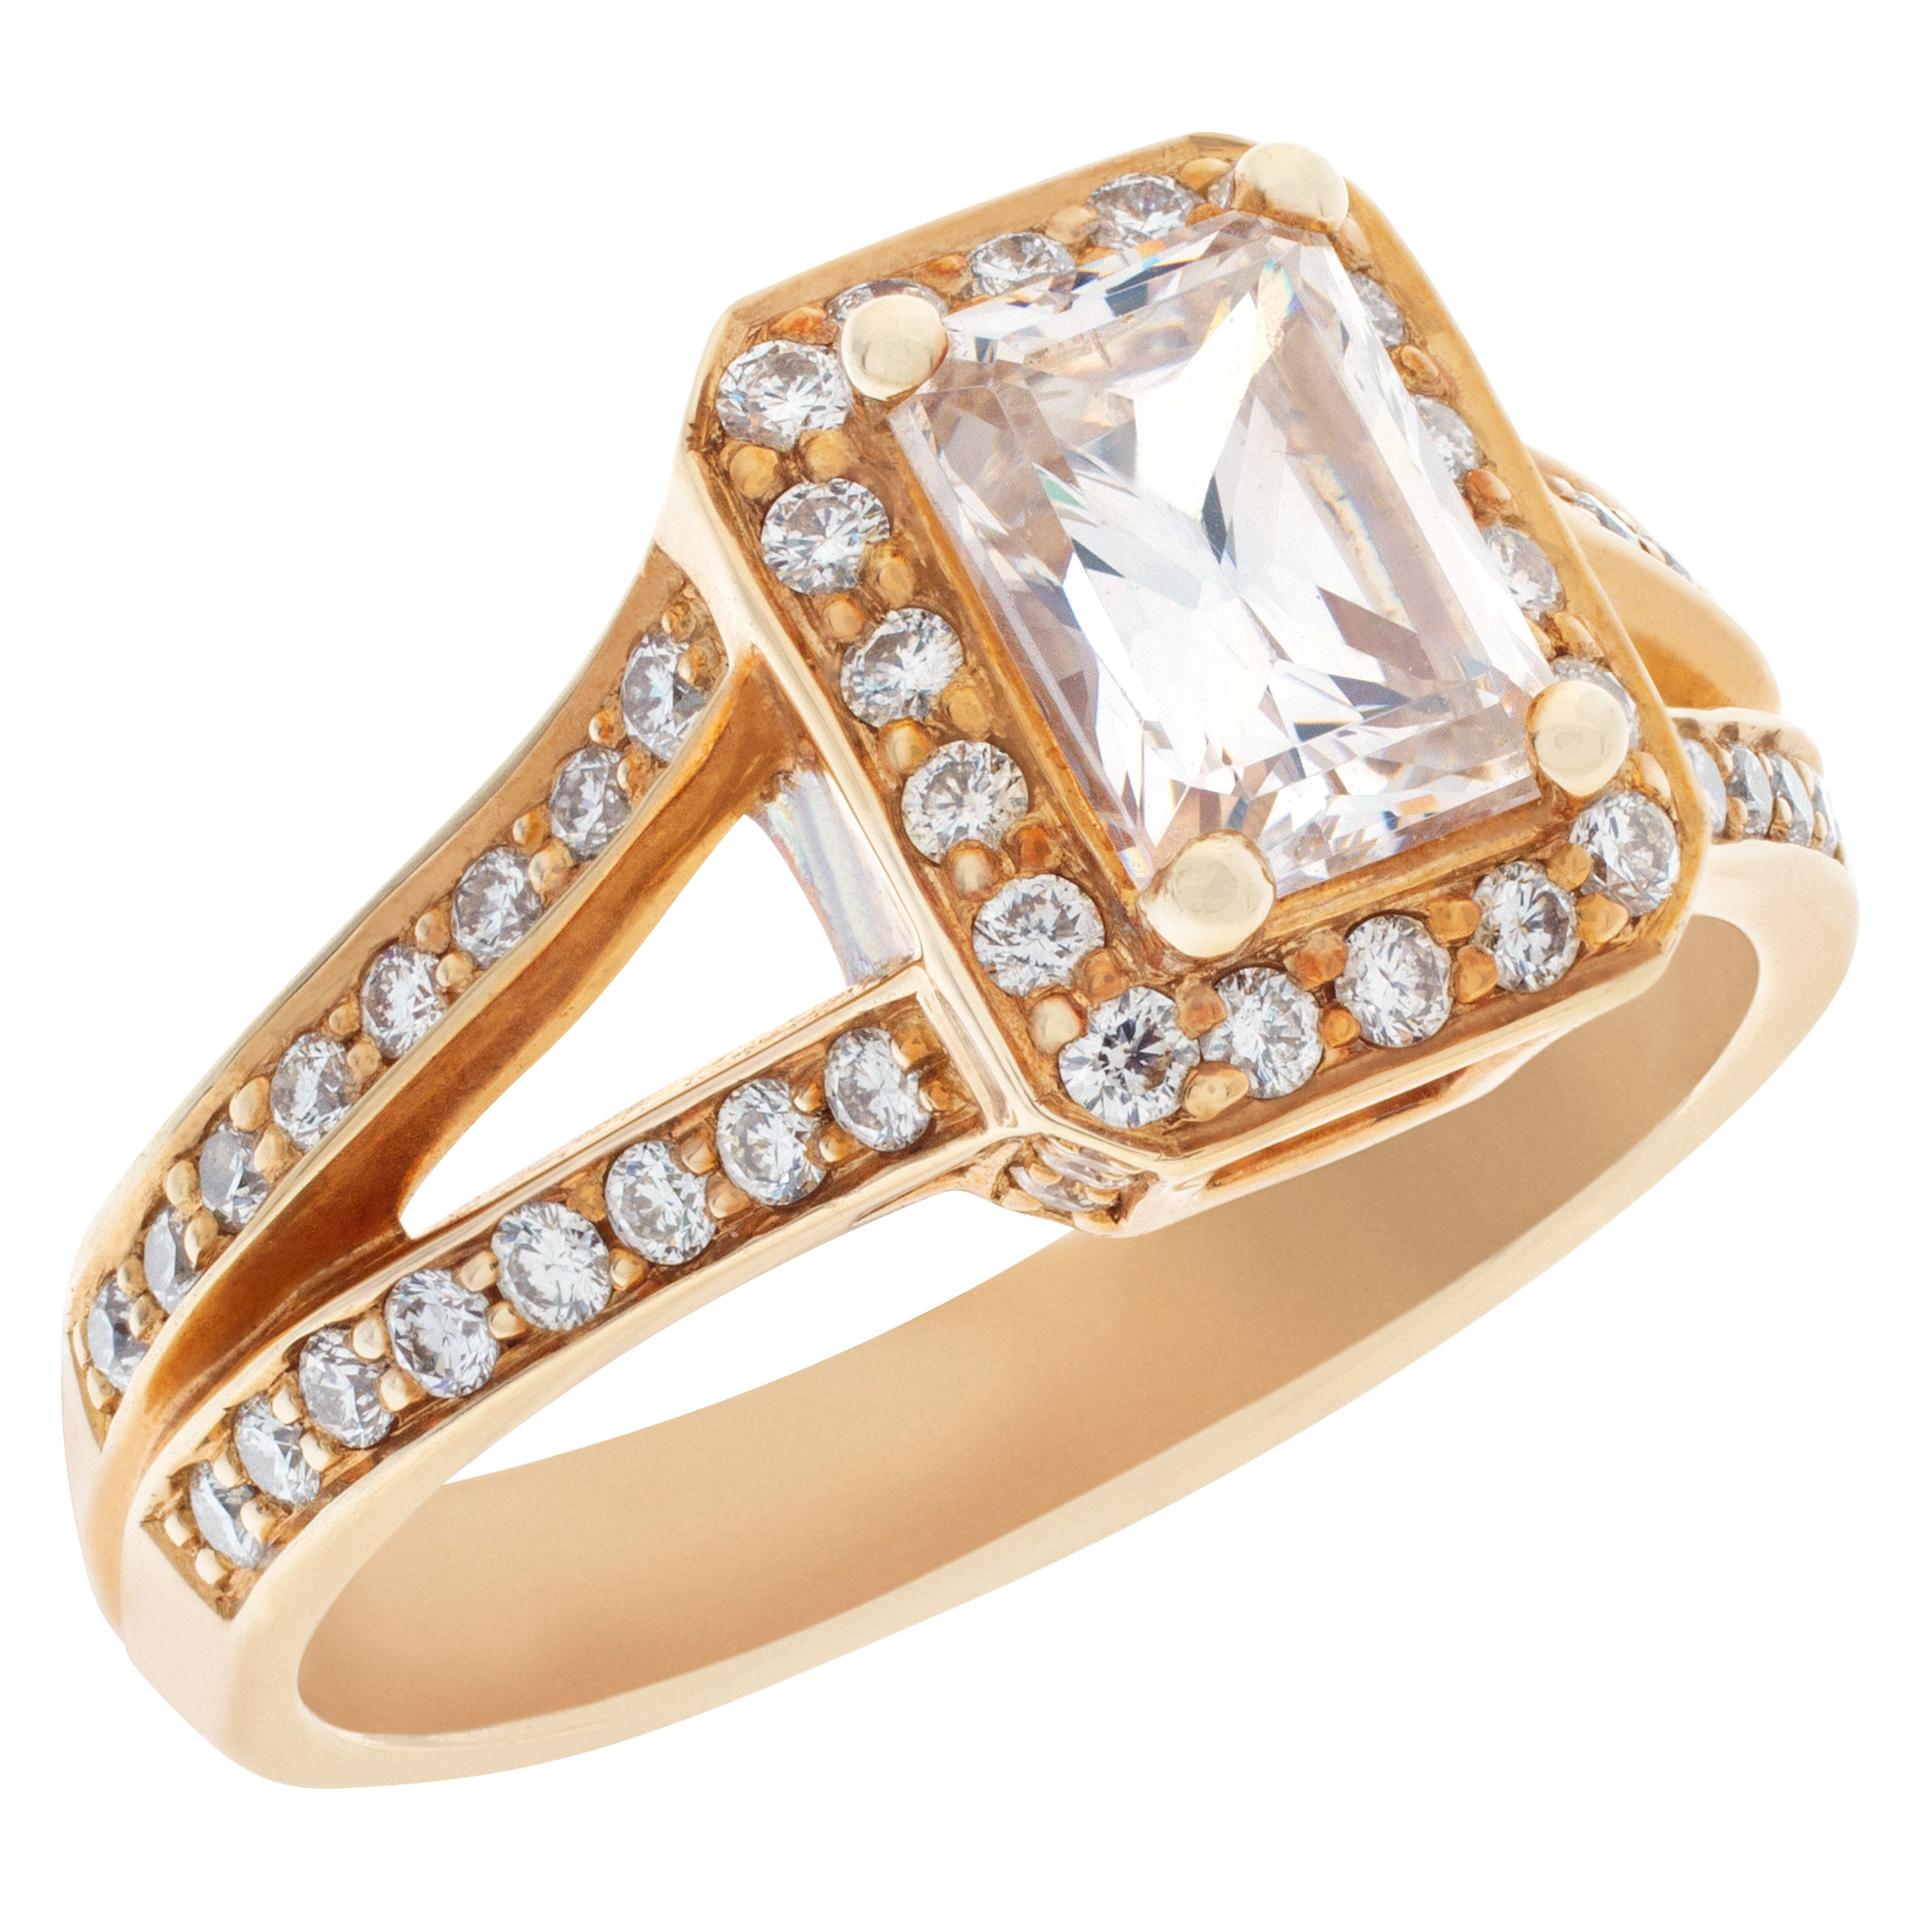 Round Cut Diamond Ring in 14k Yellow Gold Setting, 0.64 Cts in Diamonds For Sale